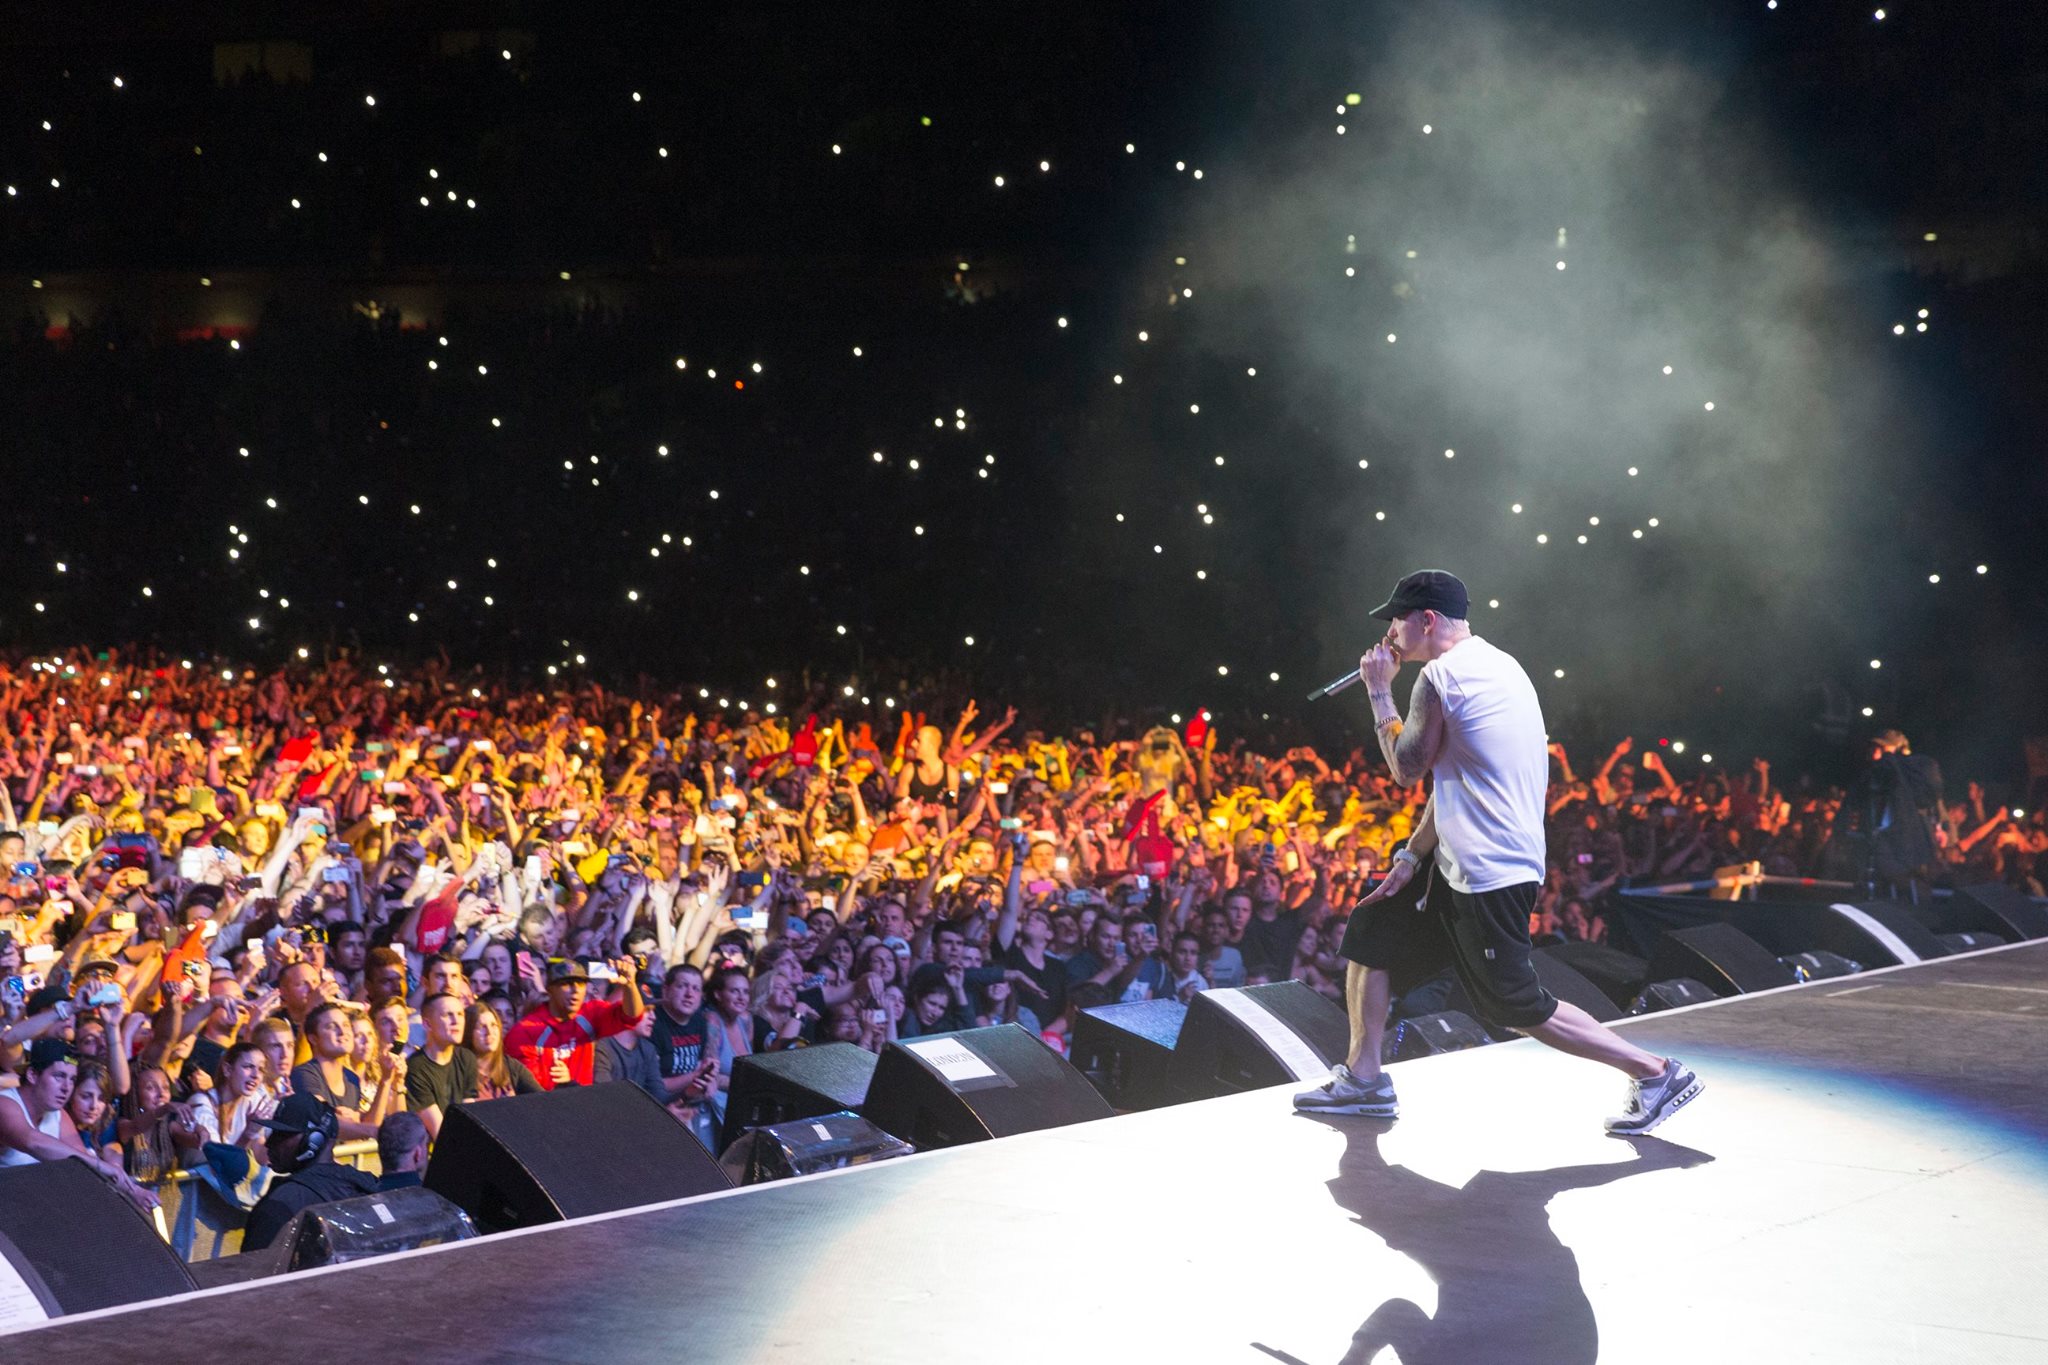 Eminem - Thank you Wembley for two unforgettable shows. More photos soon